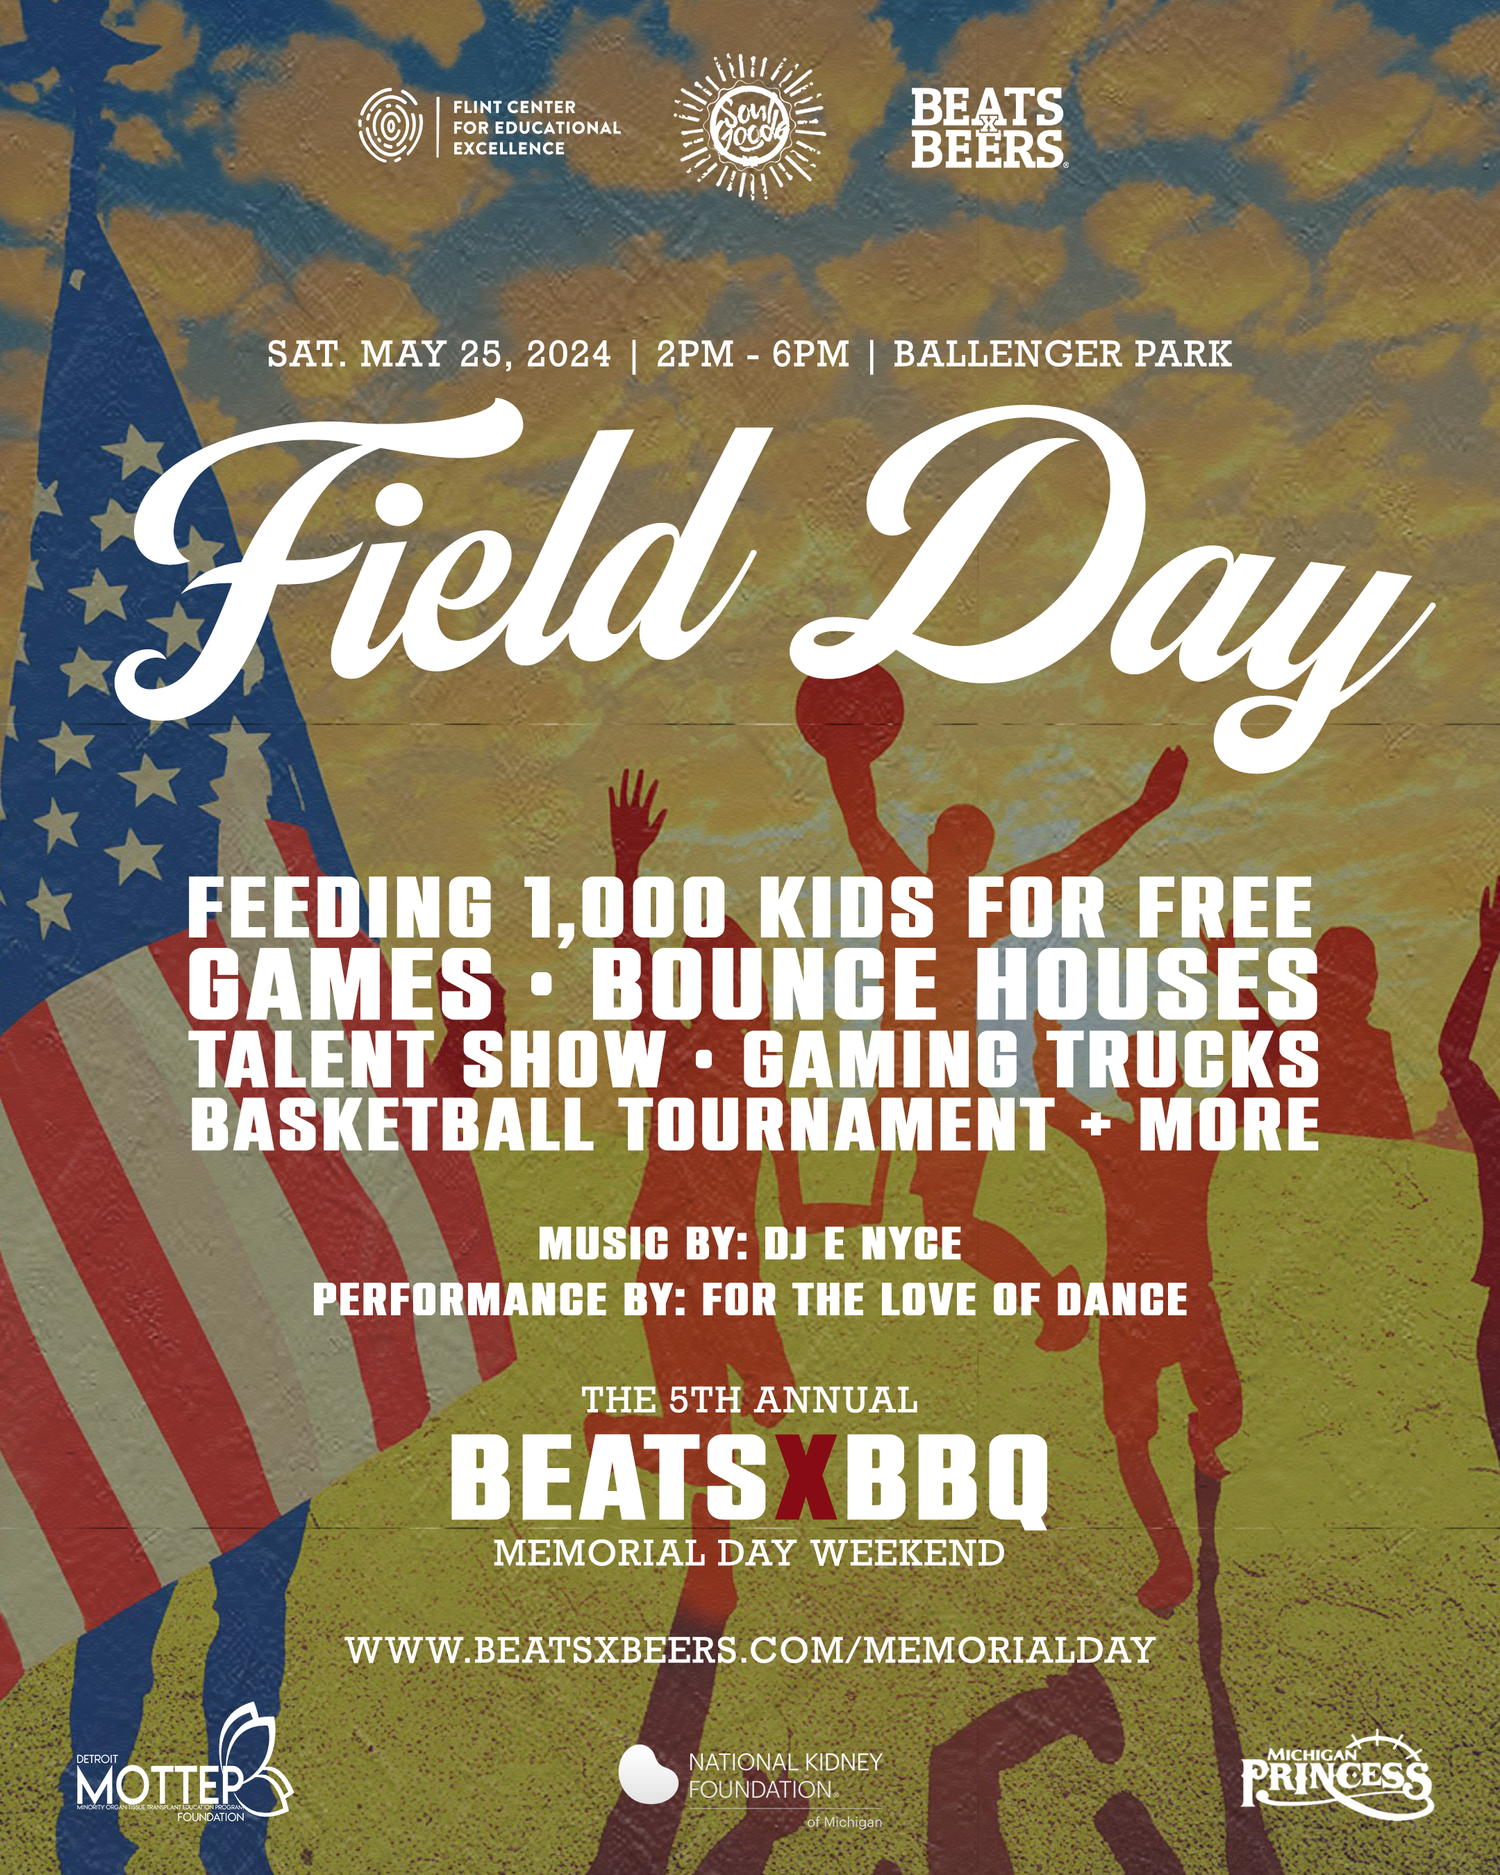 Promotional flier for the 5th annual Beats x BBQ Memorial Day weekend.